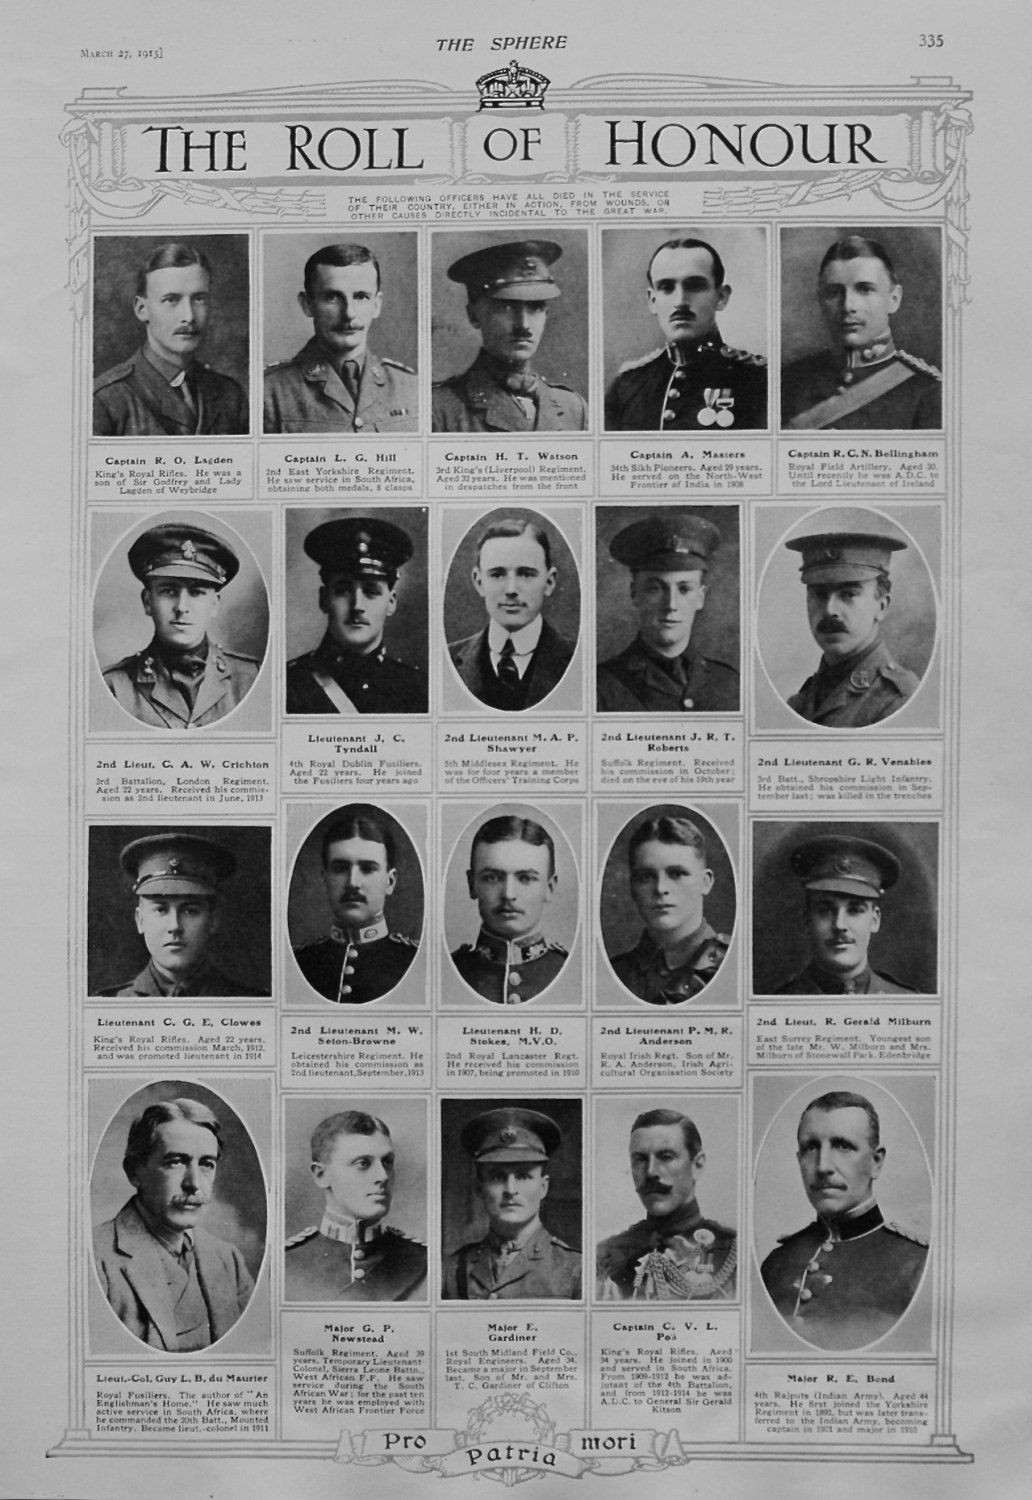 The Roll of Honour. March 27th, 1915.